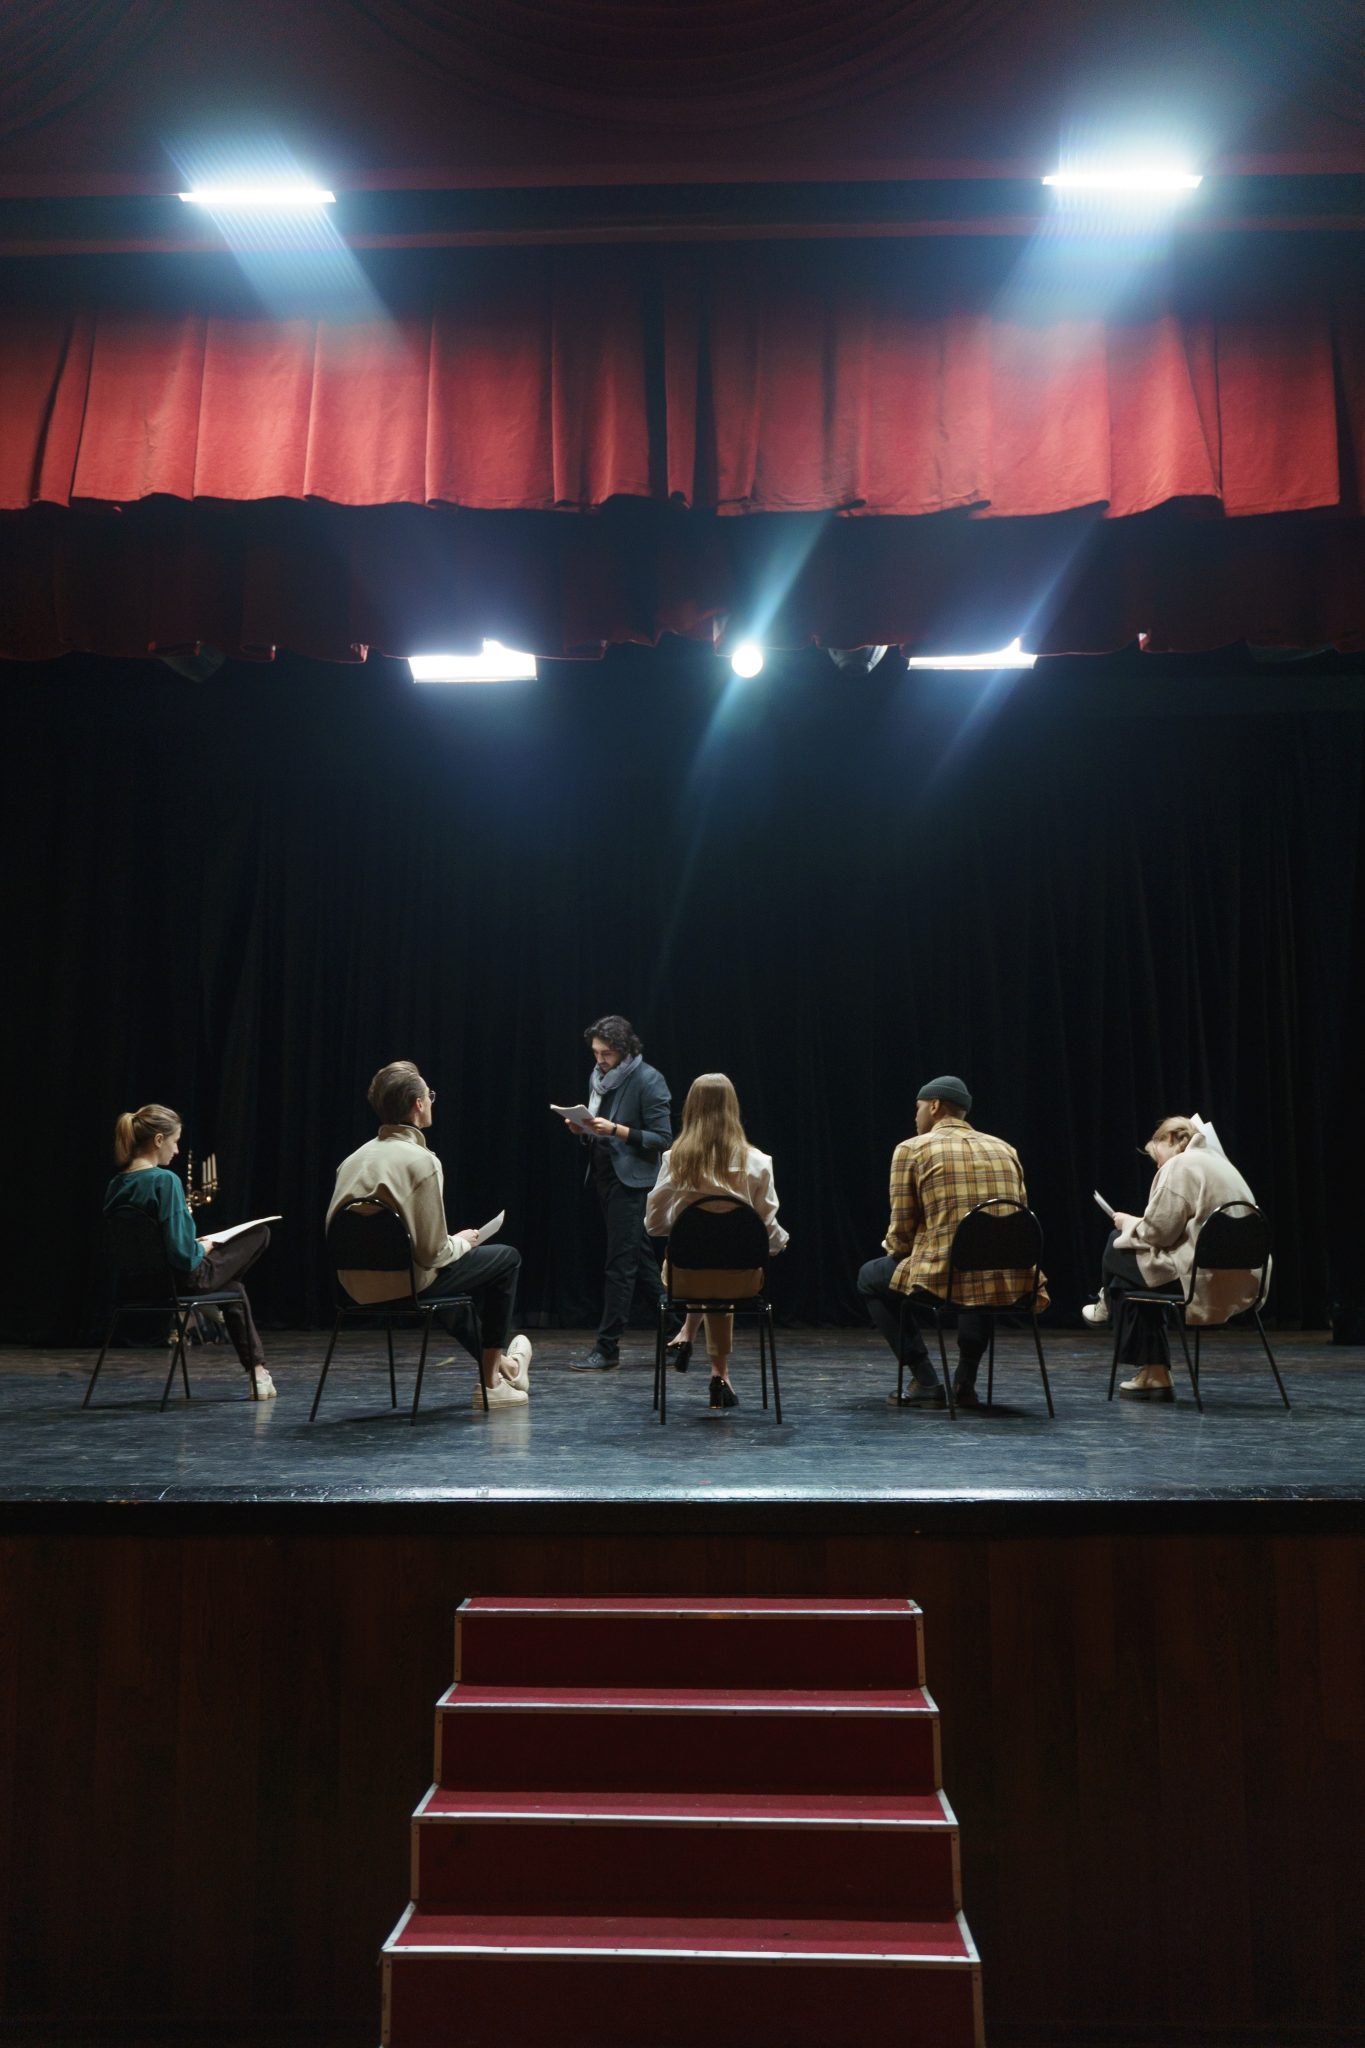 Group Of People Sitting On A Chair On Stage